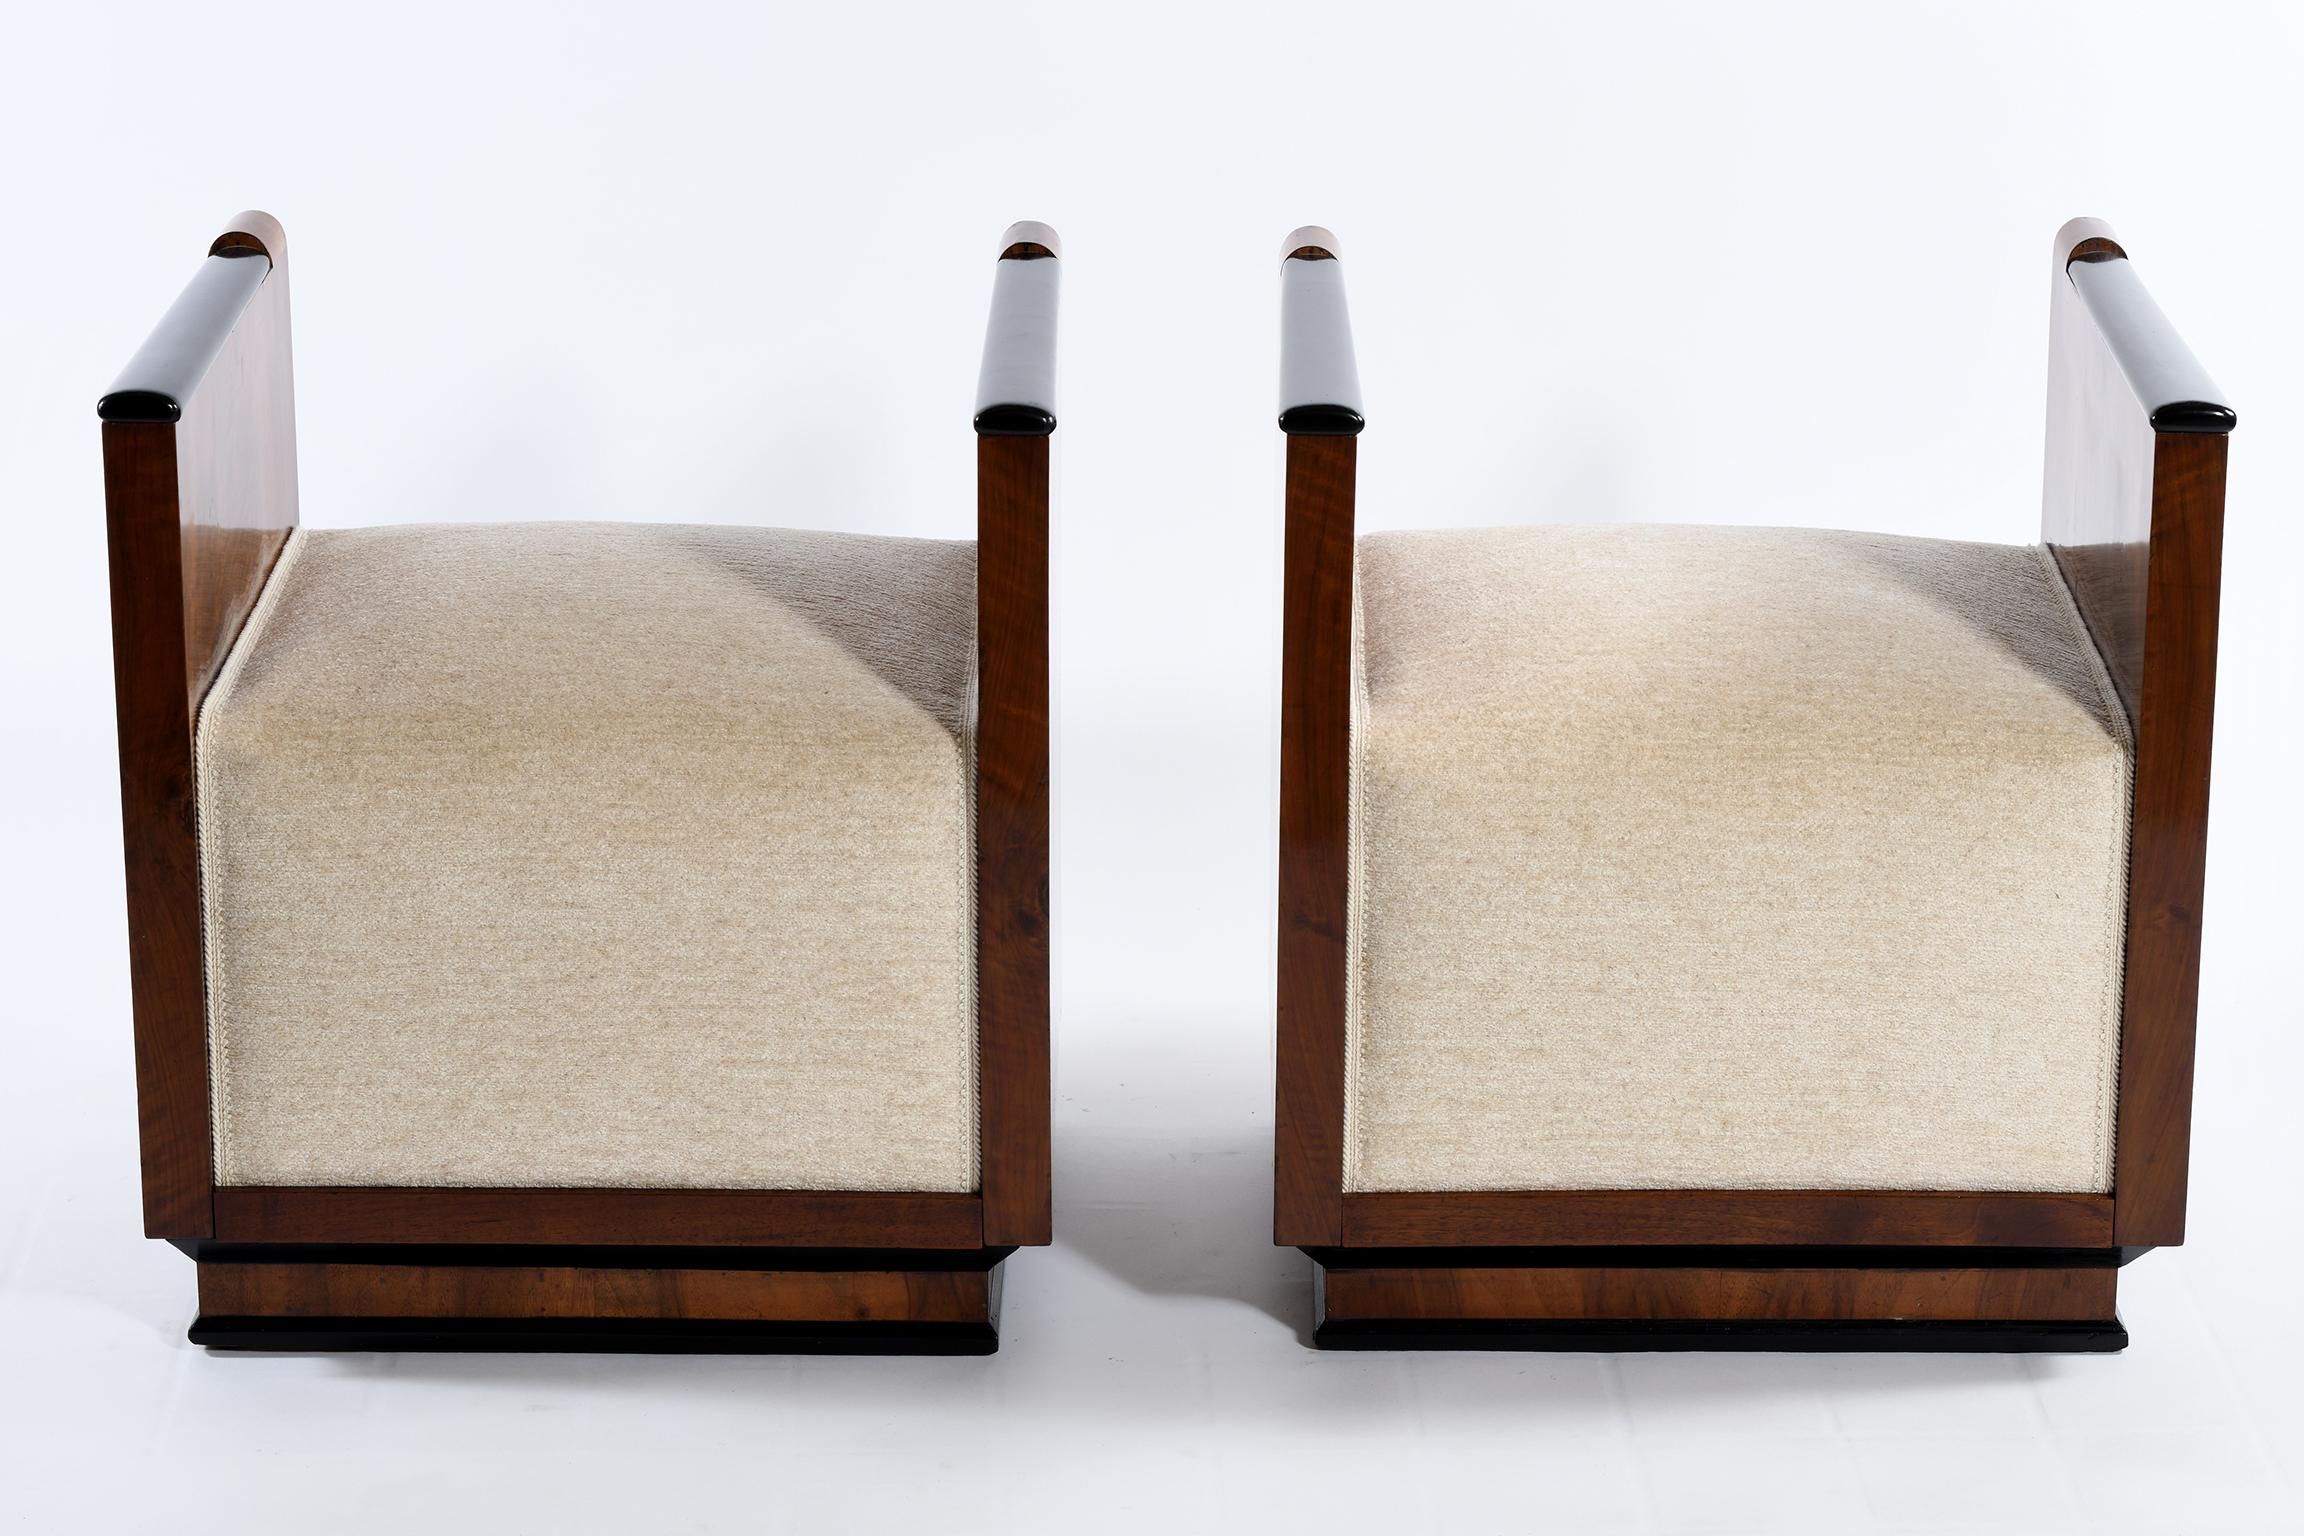 Pair of Italian Art Deco stools sides with splendid walnut in warm color, the black lacquer details border and enhance the elegance of the geometric and rigorous design, the armrests widen on one side and tighten towards the other, the base also